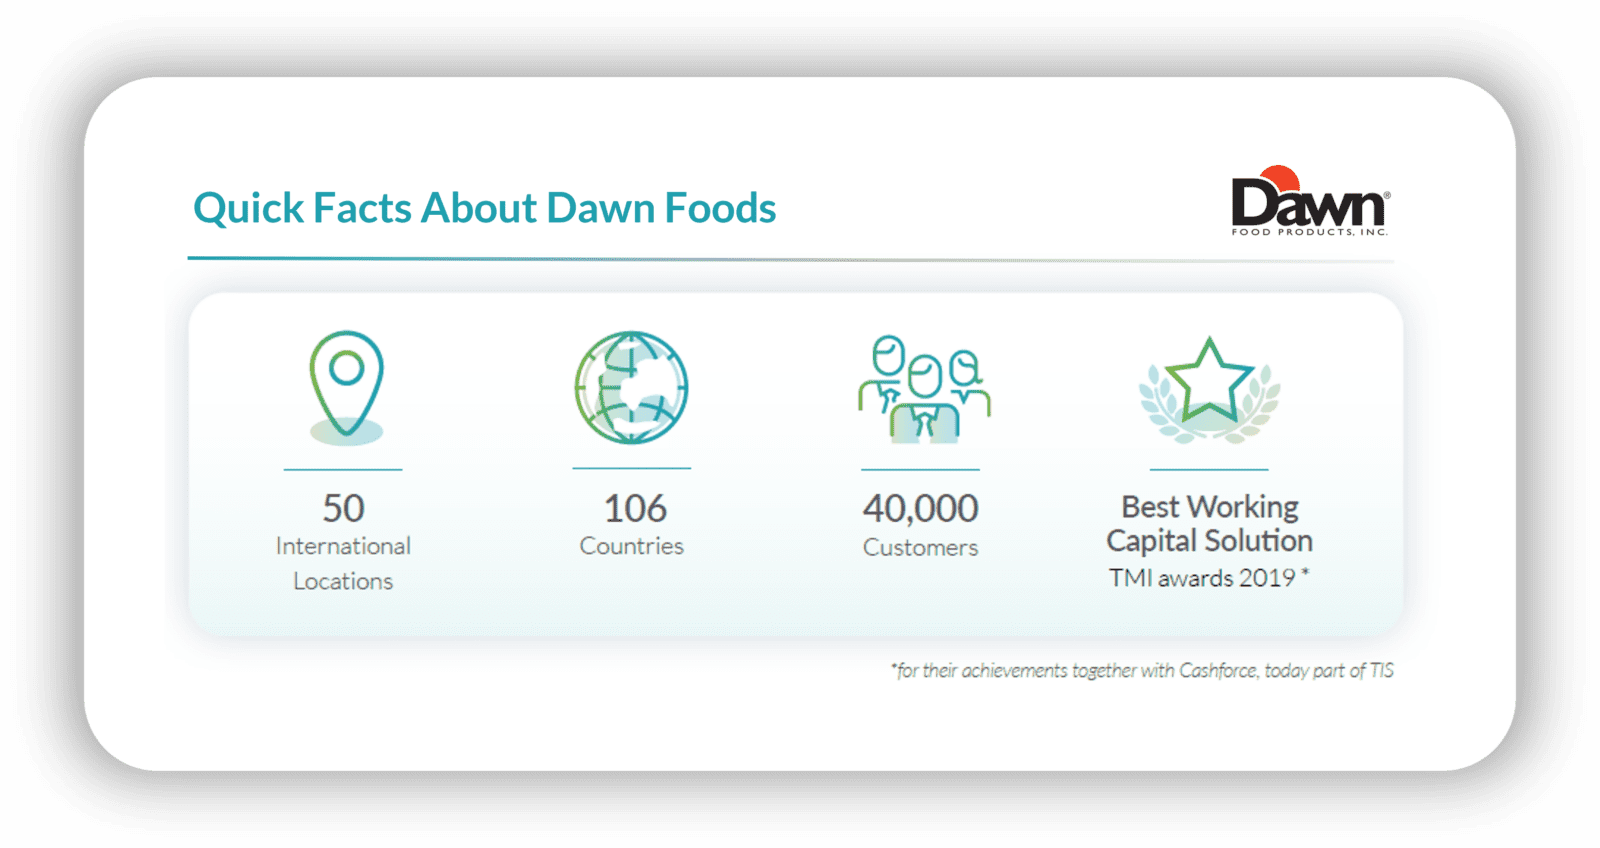 An overview of the Dawn Foods global footprint and operations. 